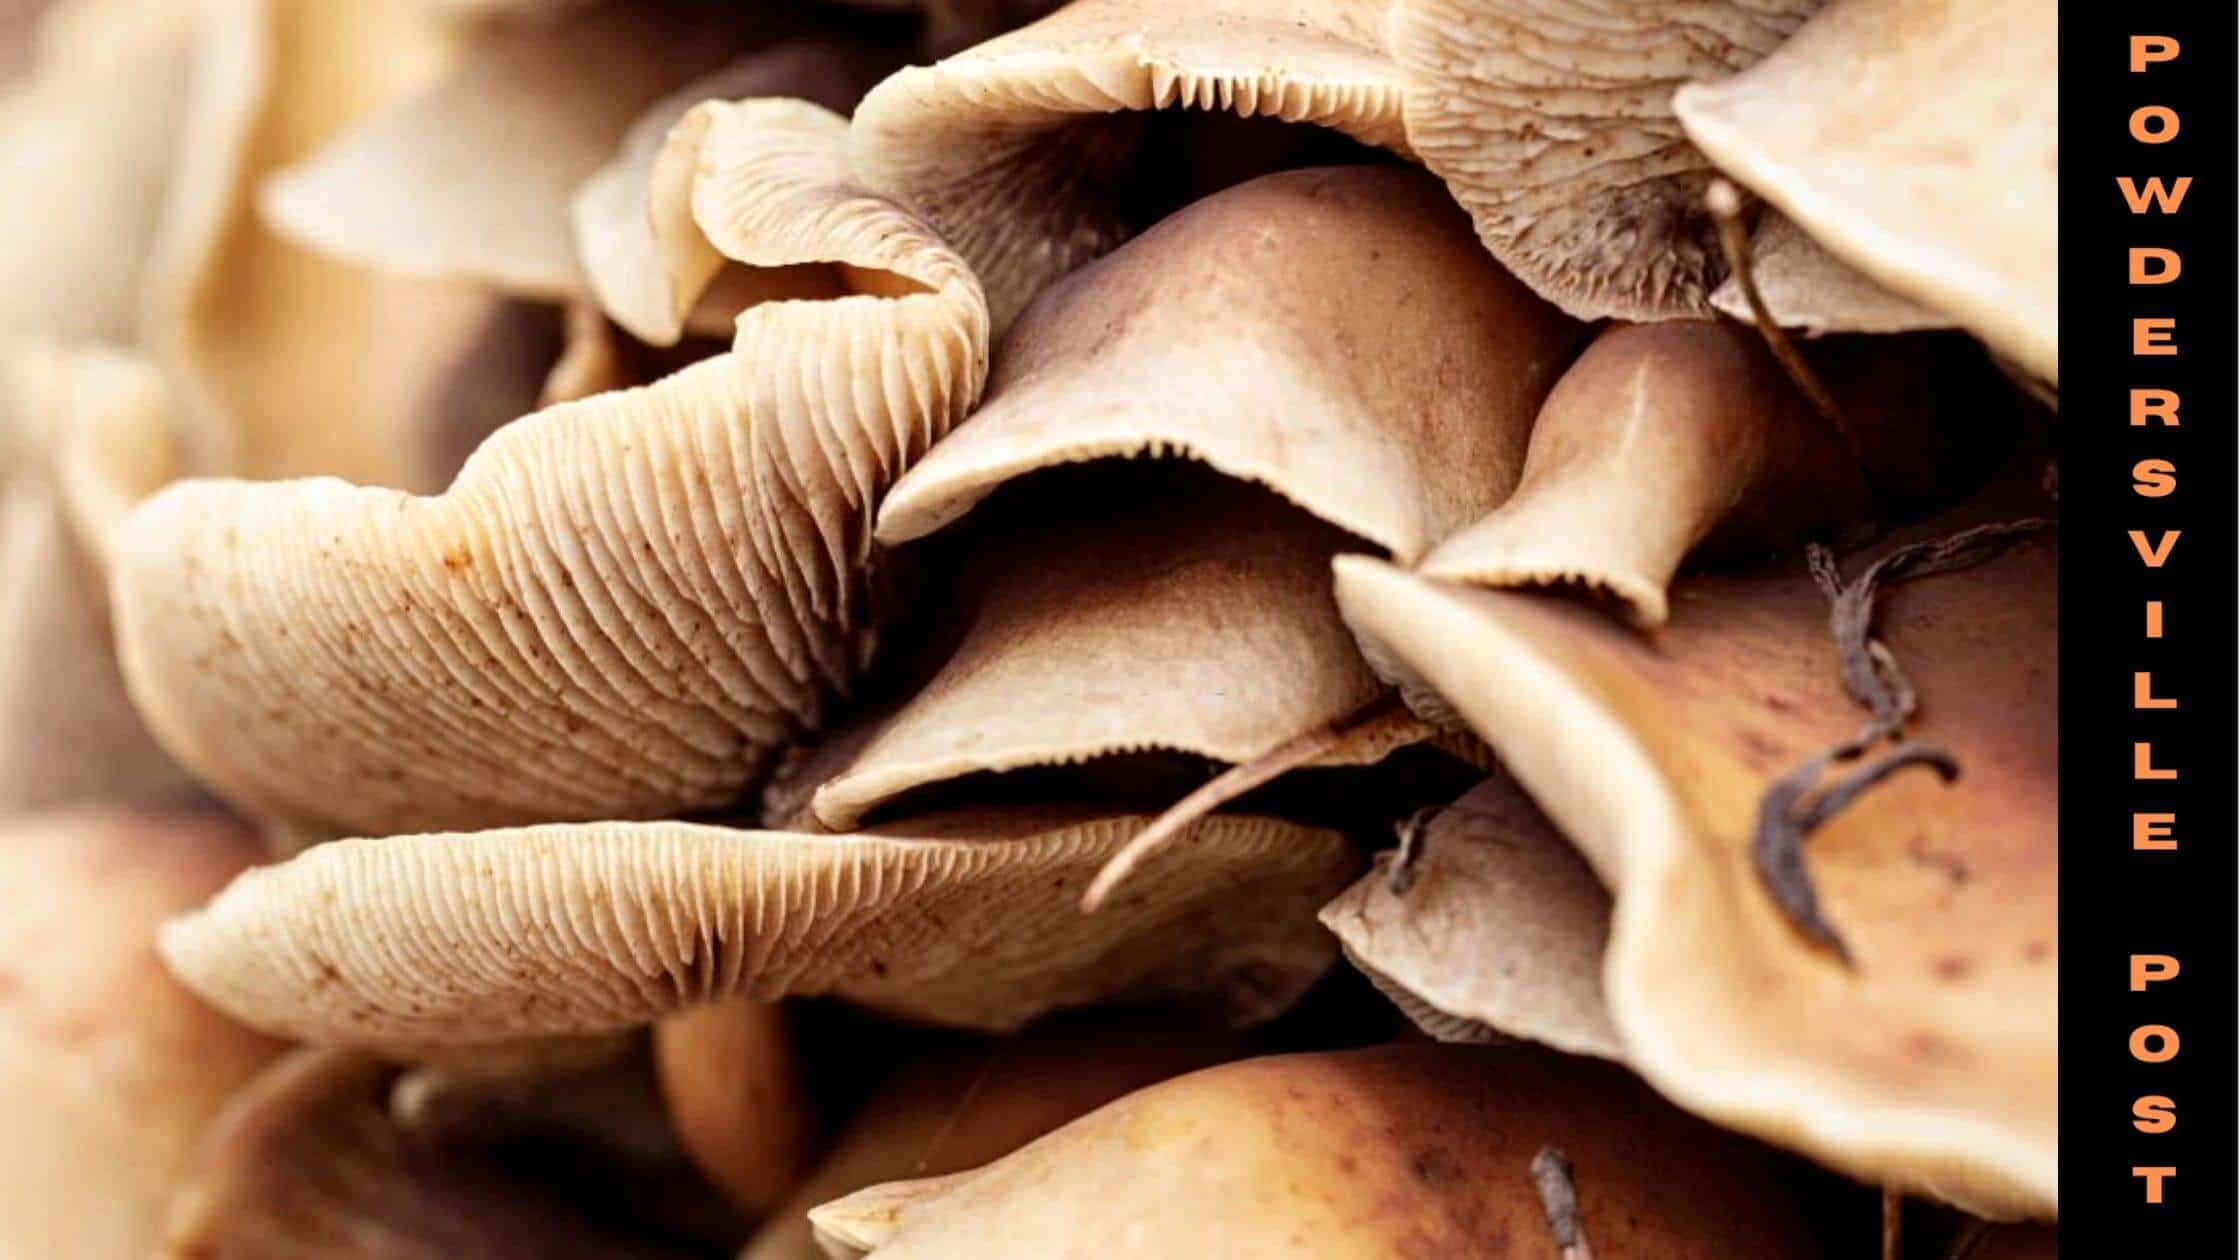 The Use Of Psilocybin In Treatment Can Cure Depression